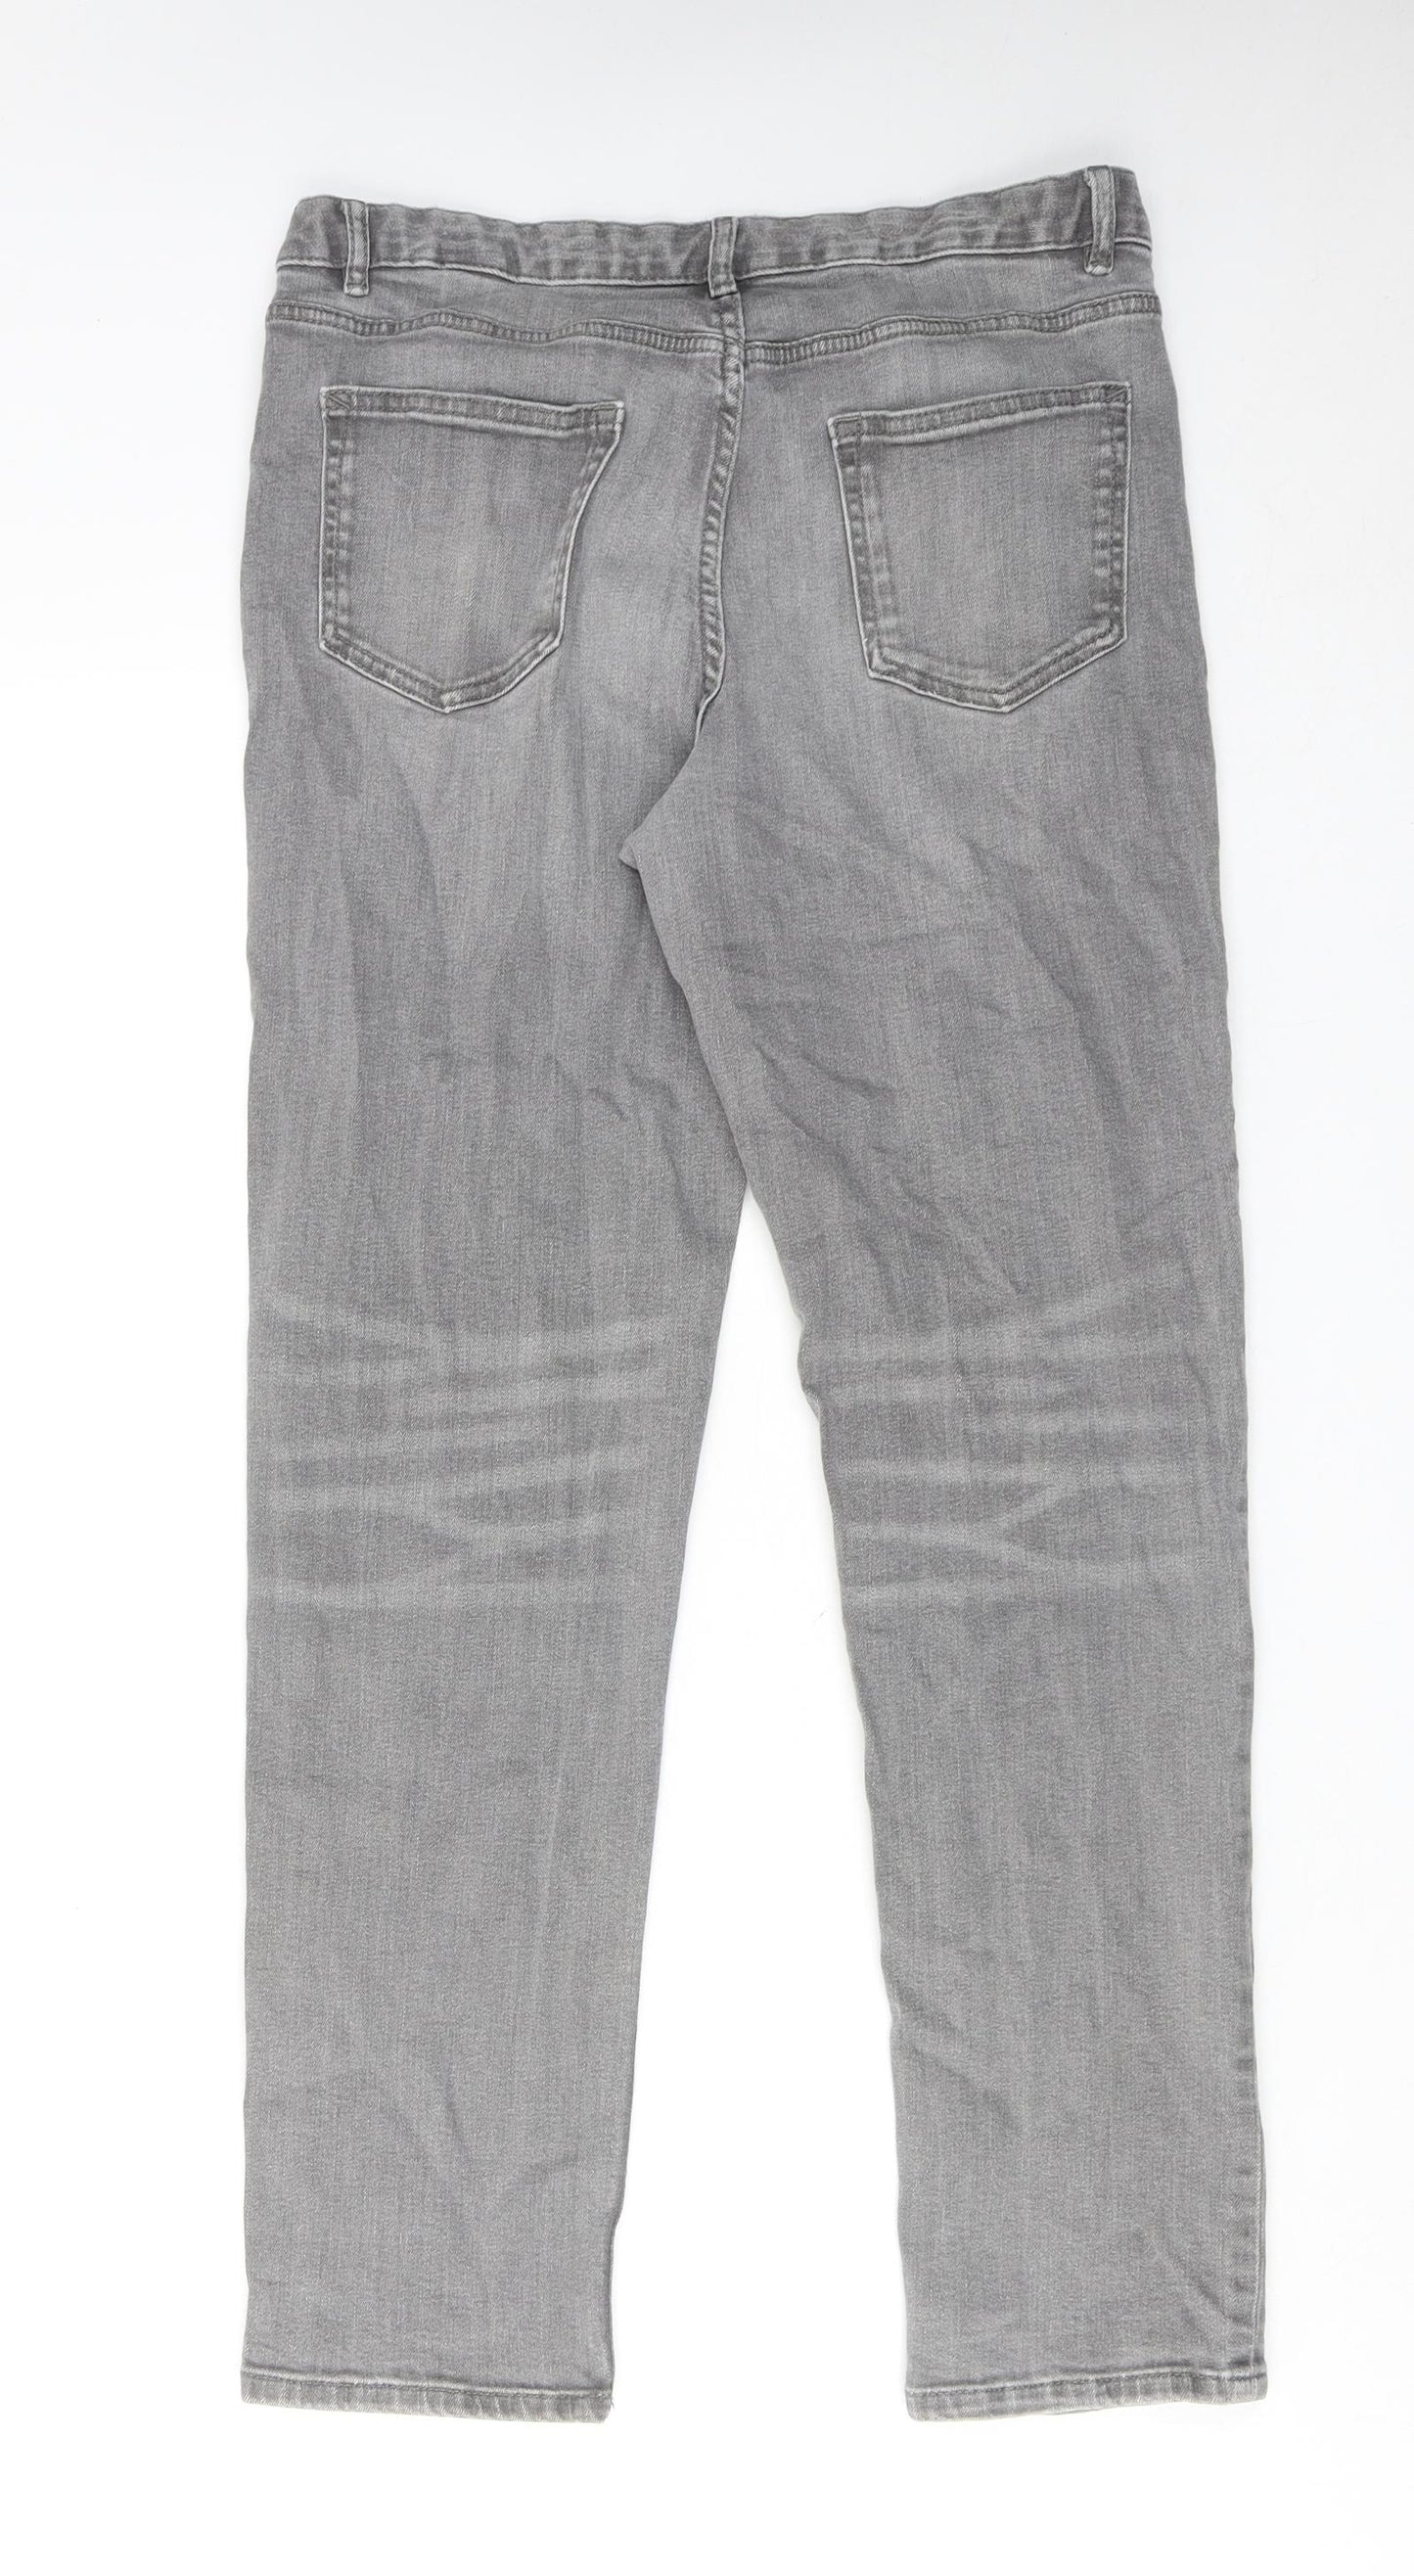 Marks and Spencer Womens Grey Cotton Straight Jeans Size 12 Slim Zip